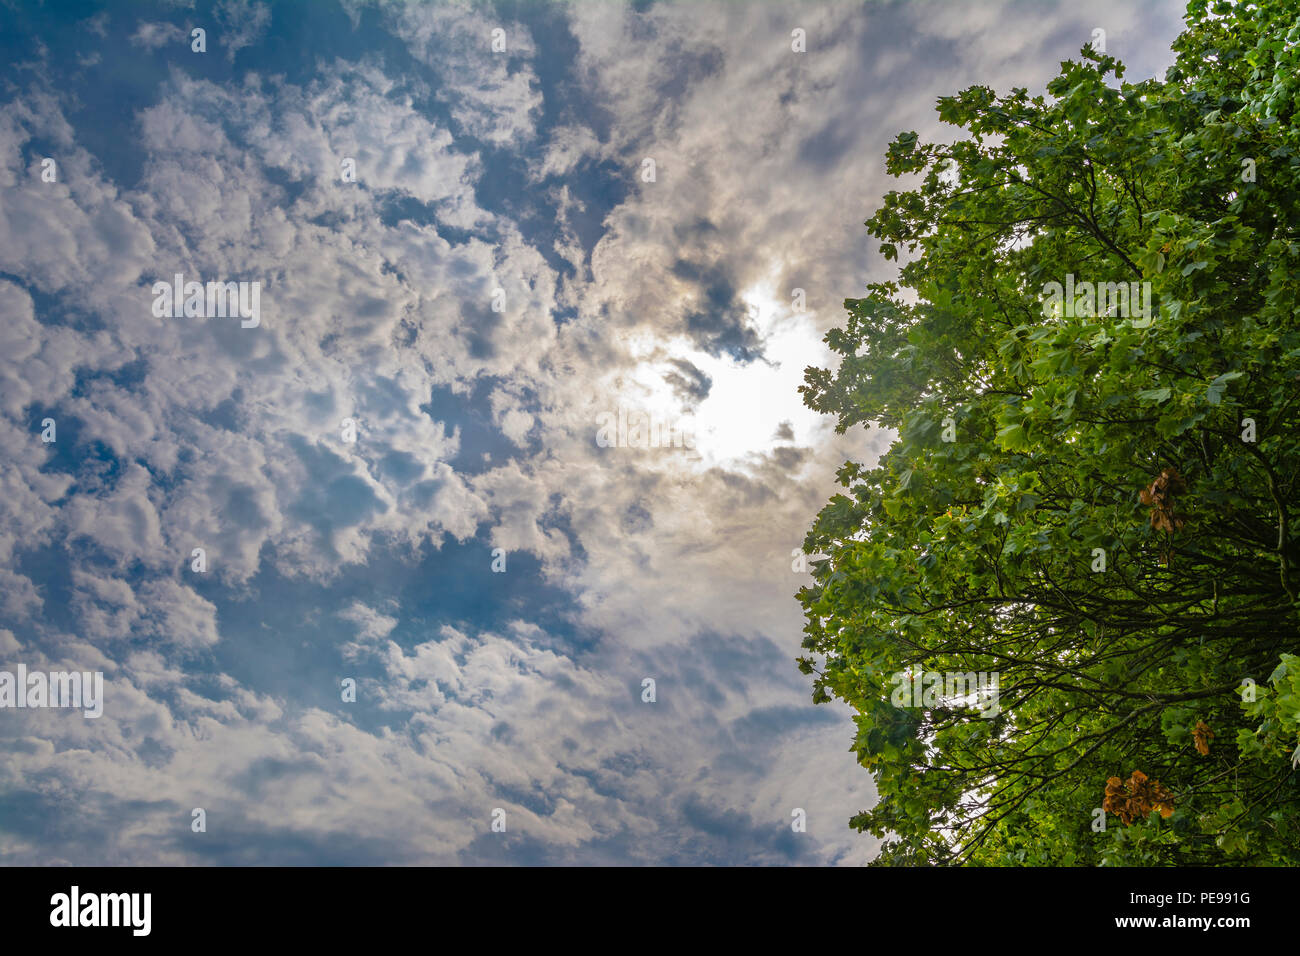 High contrast scene of blue sky with the sun trying to shine through white clouds, by a green tree, in Summer in the UK. Stock Photo